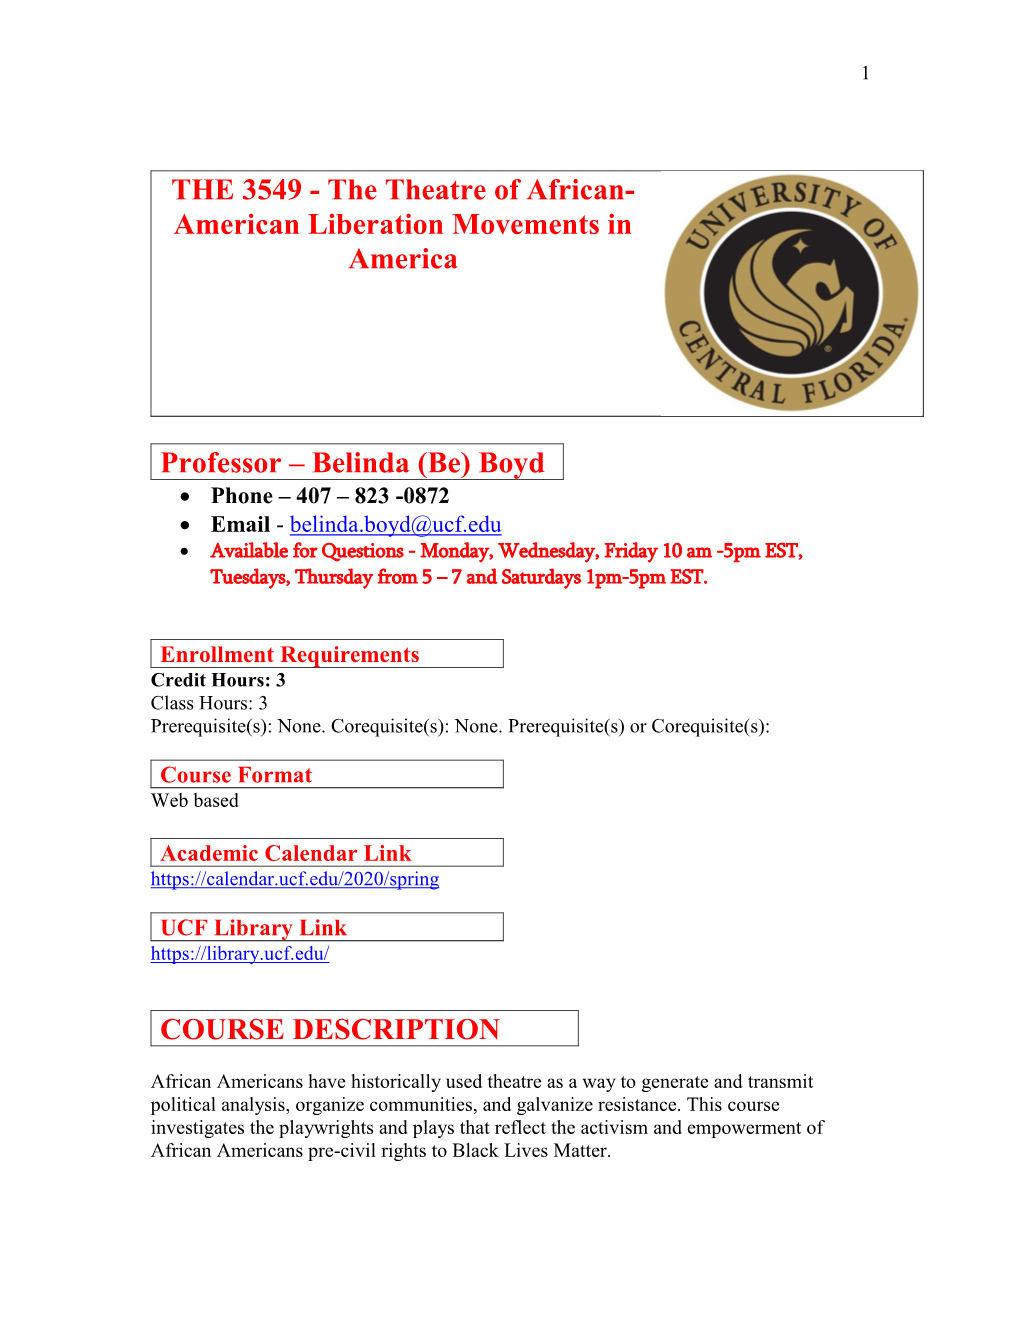 THE 3549 - the Theatre of African- American Liberation Movements in America